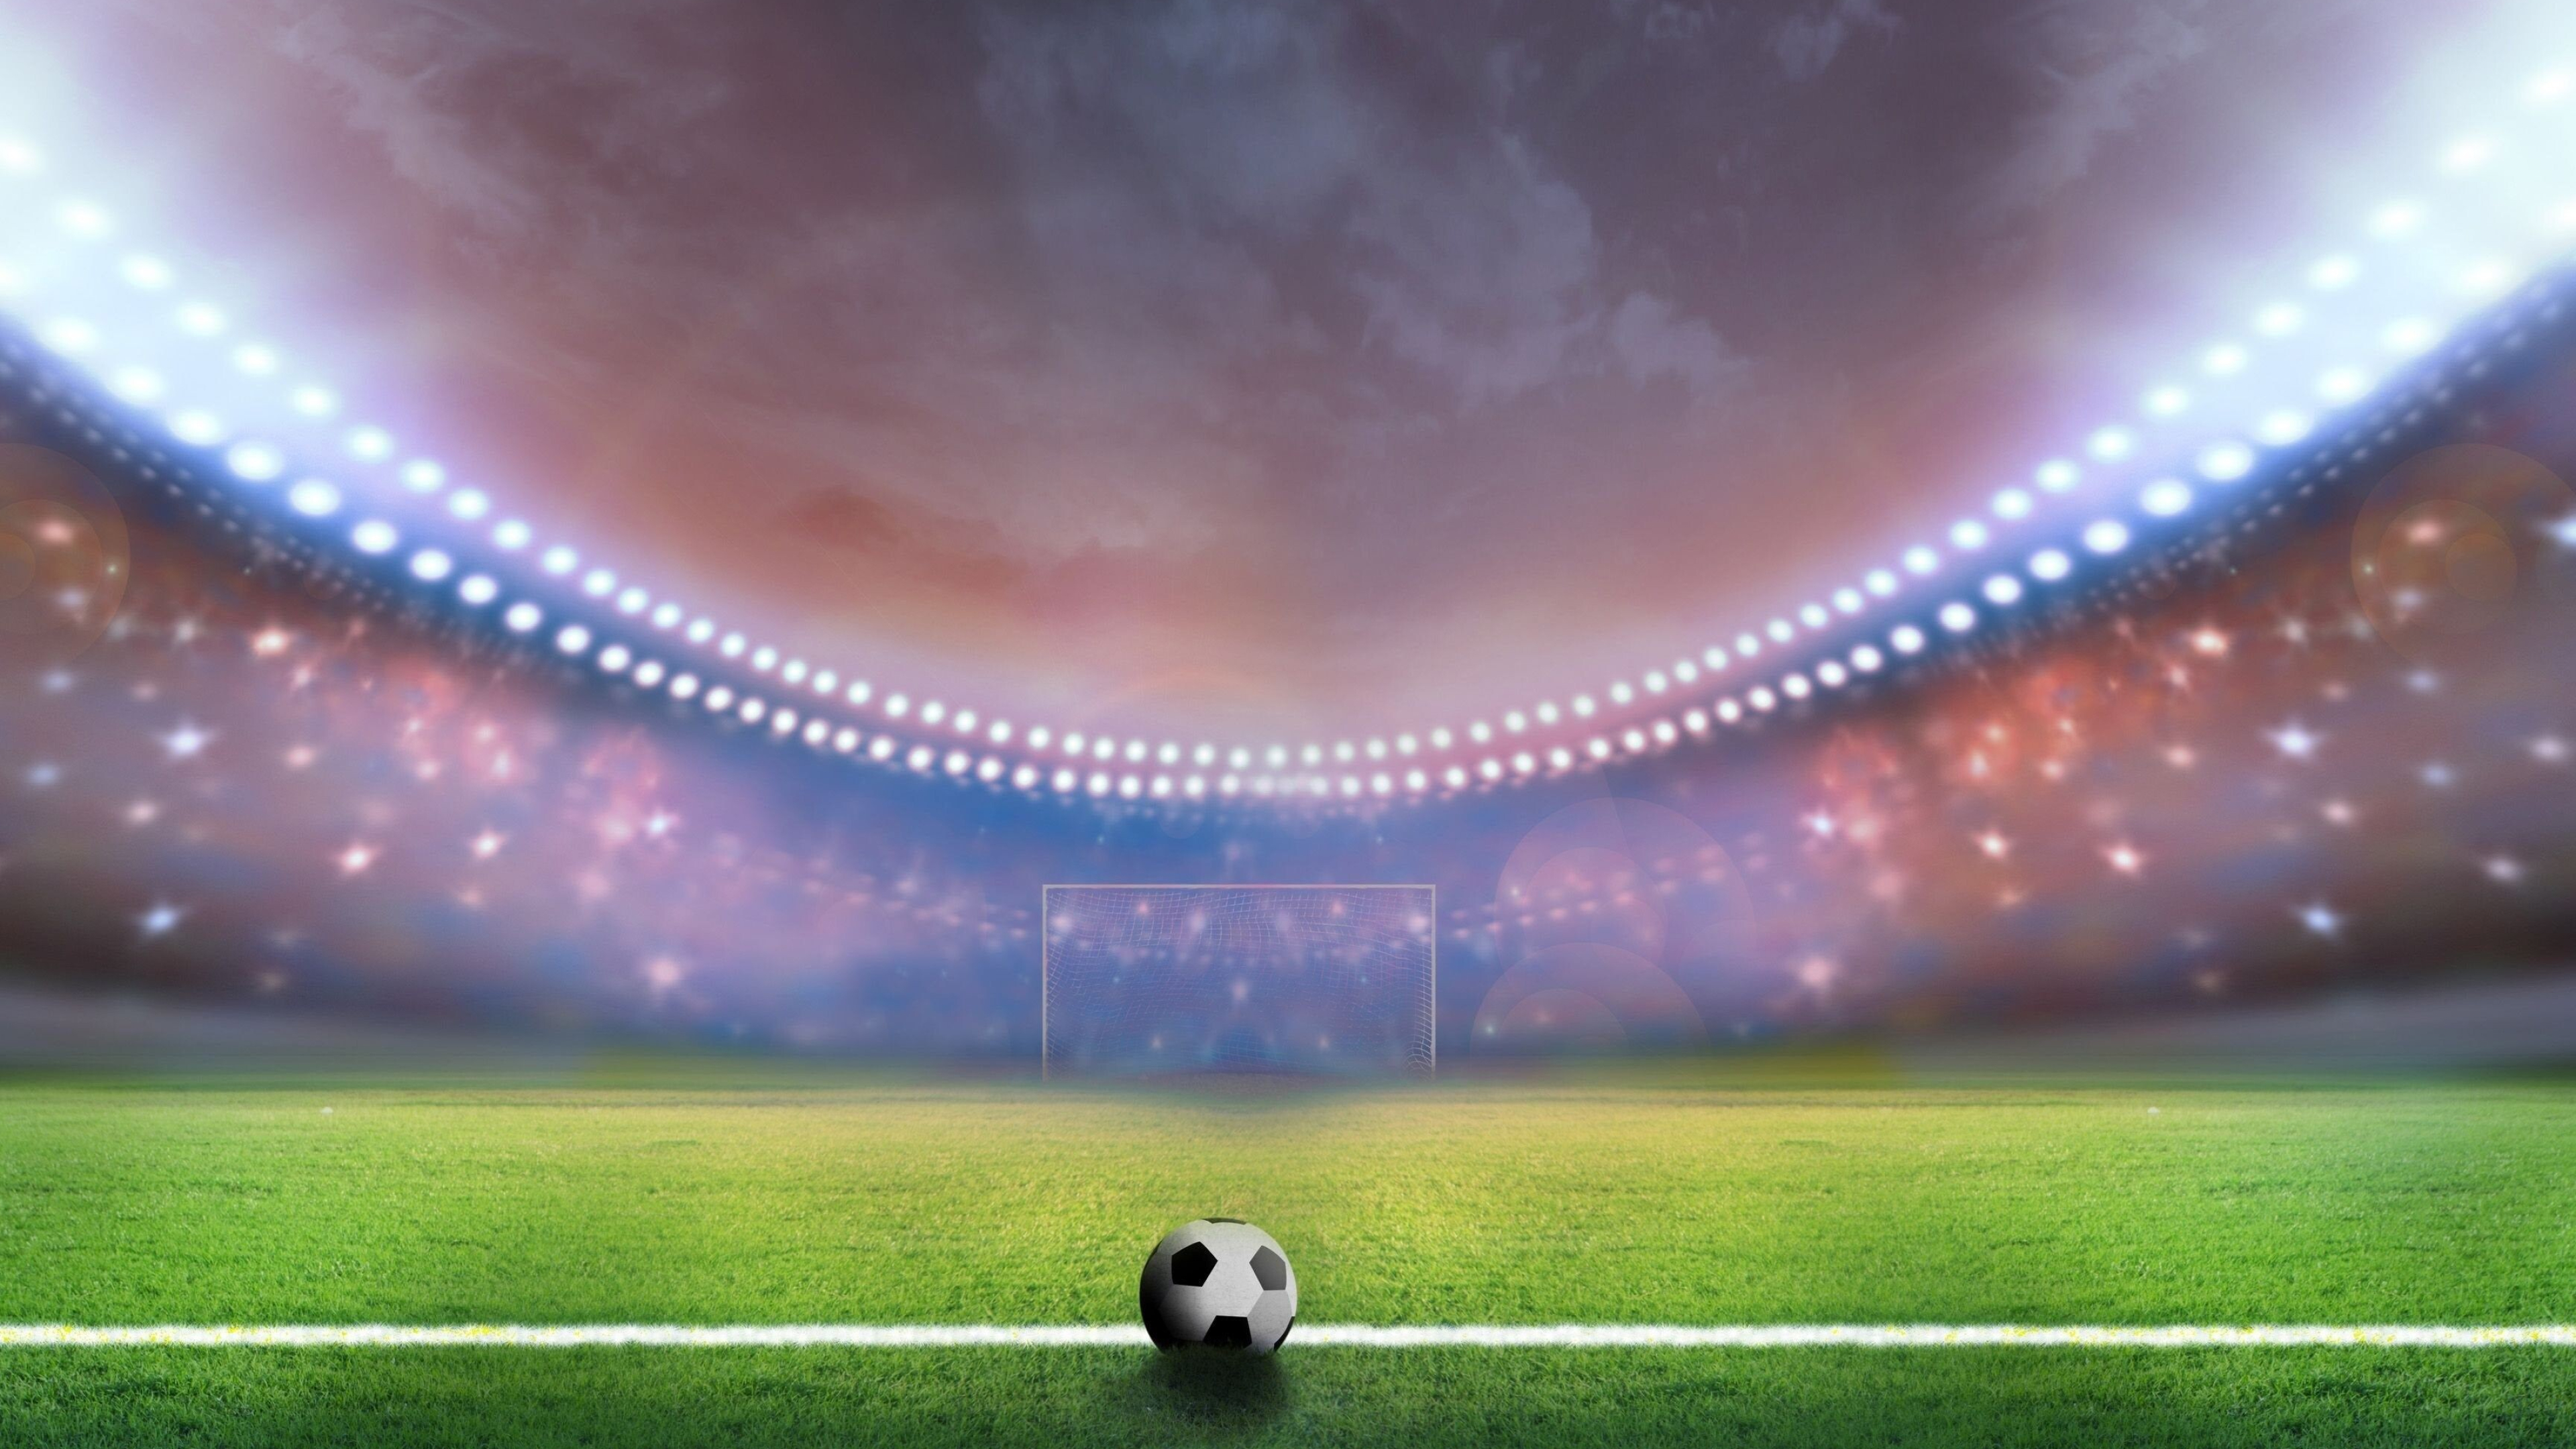 Goal (Sports): A soccer-specific stadium, Sports playing field surface, Adidas Telstar-style ball. 3840x2160 4K Background.